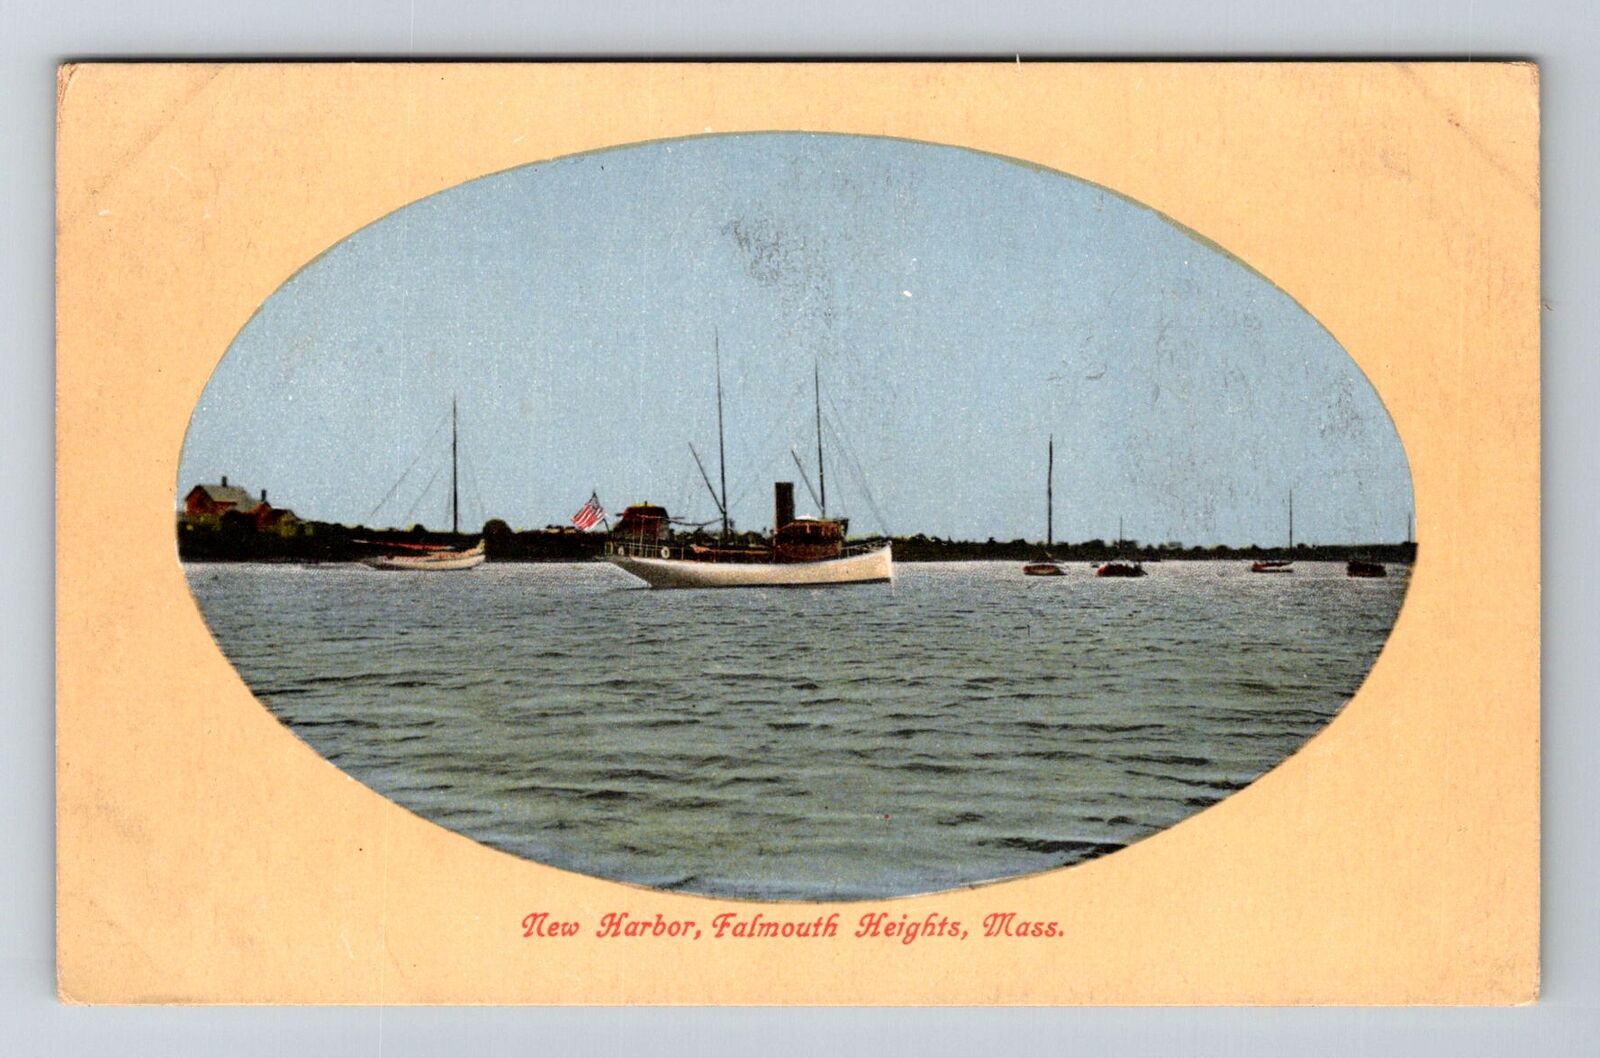 Falmouth Heights, MA-Massachusetts, New Harbor Antique c1911, Vintage Postcard